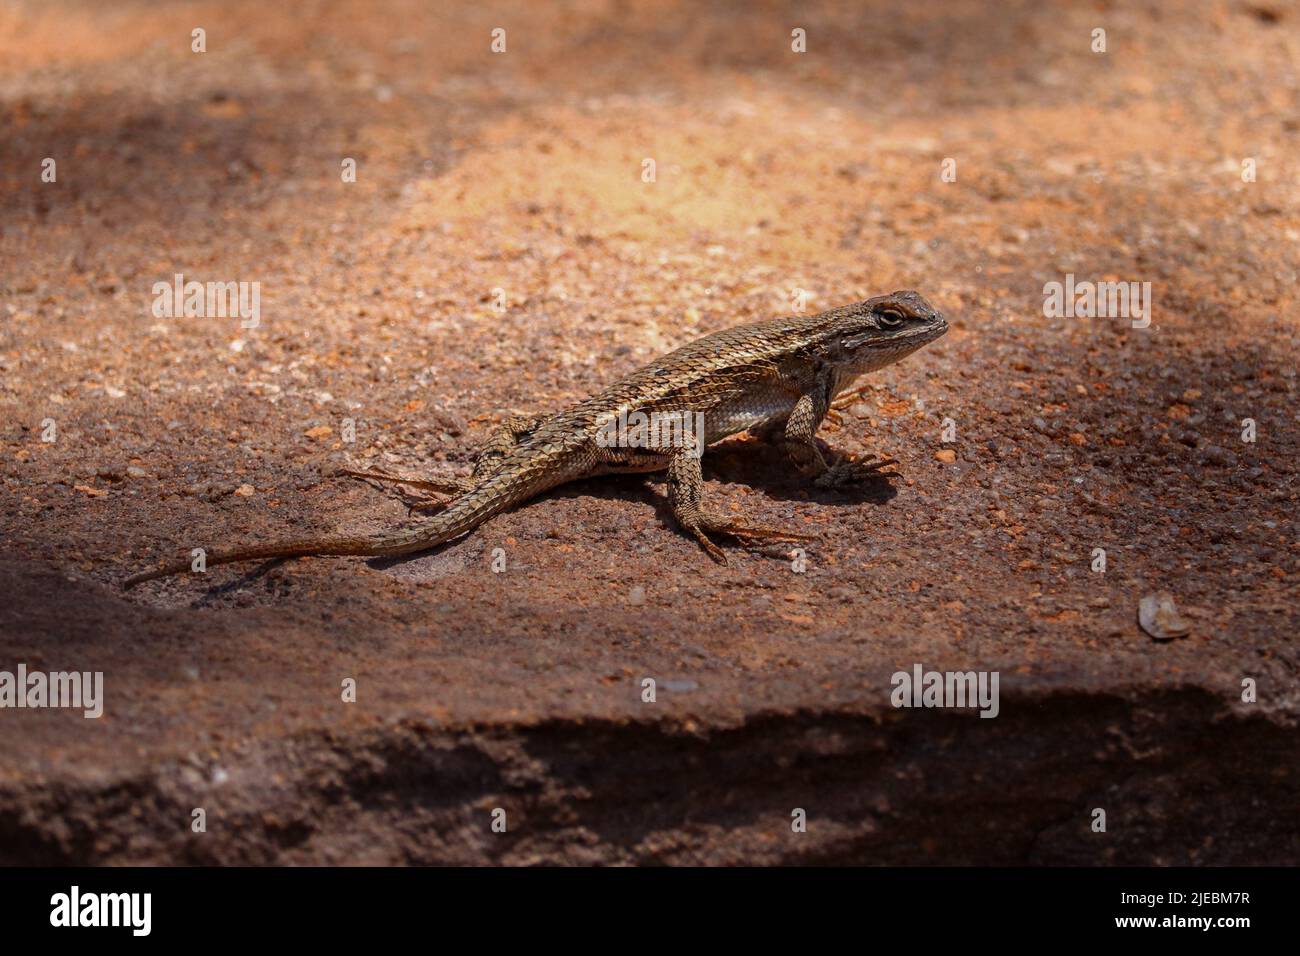 Southwestern fence lizard or Sceloporus cowlesi standing on a rock at Rumsey Park in Payson, Arizona. Stock Photo